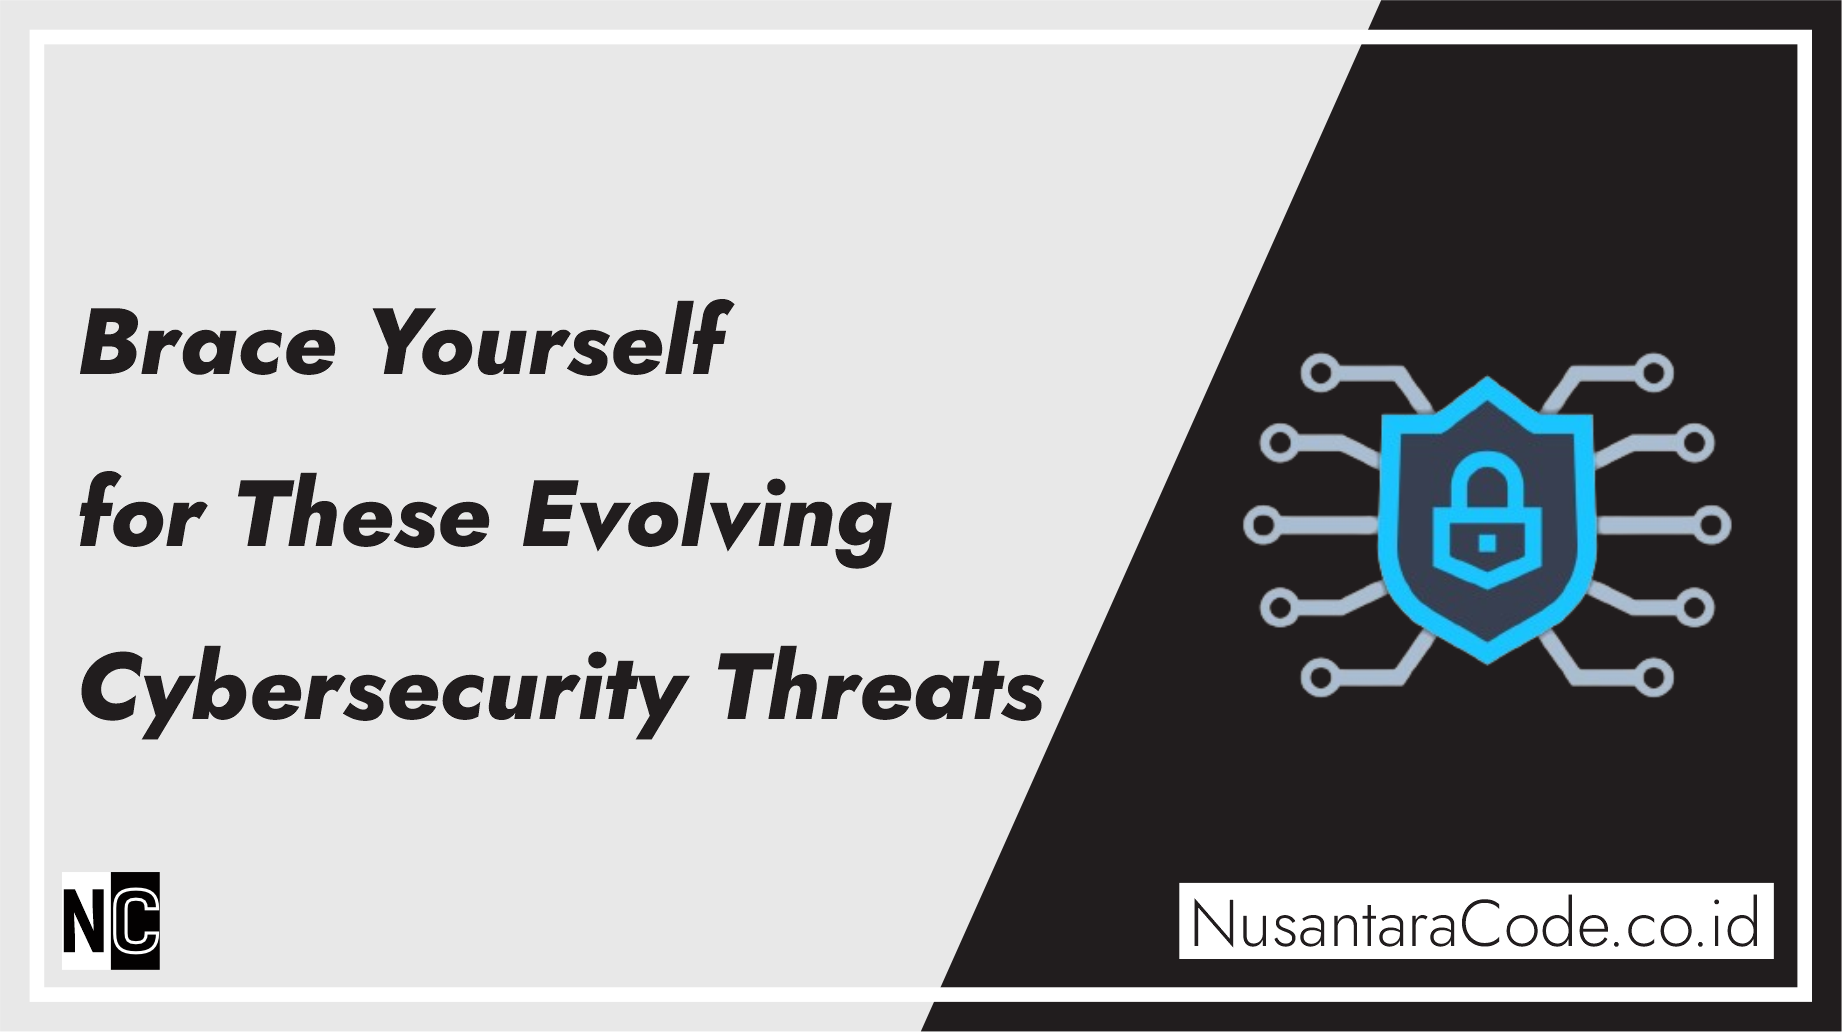 Brace Yourself for These Evolving Cybersecurity Threats